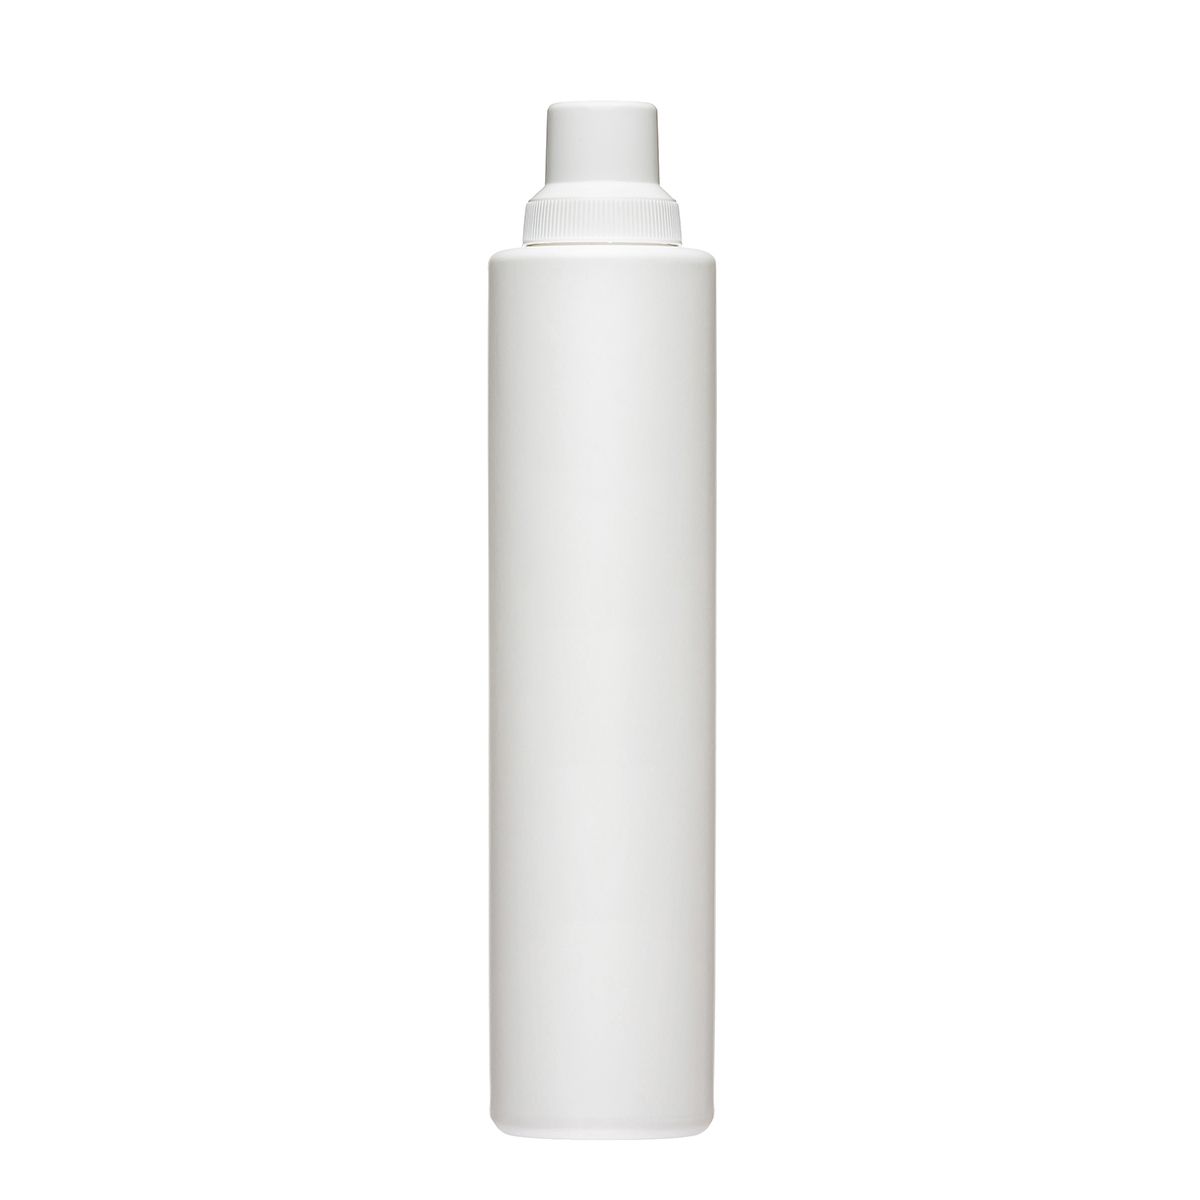 The 750 ml HDPE bottle Dufa 750 with measurin cap is perfect choice for any product in household chemicals.